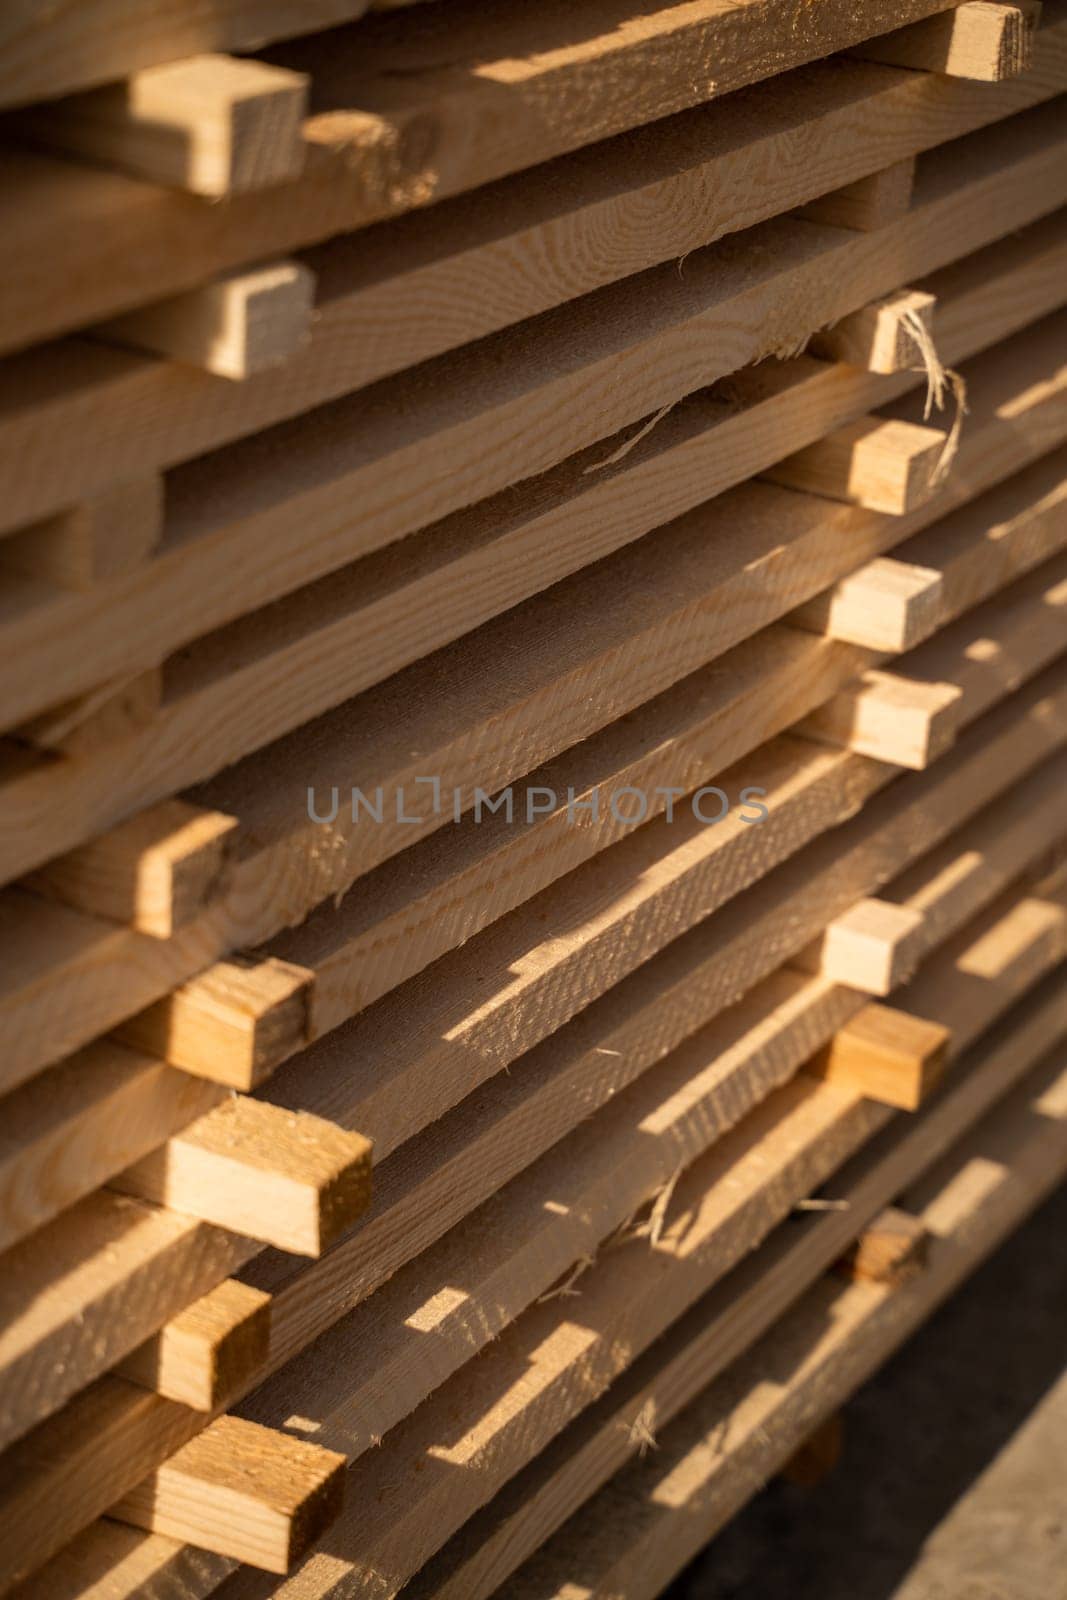 Wooden planks and beams at a outdoor lumber warehouse in a woodworking industry. Stacks with pine lumber. Folded edged board. Wood harvesting shop. by vovsht